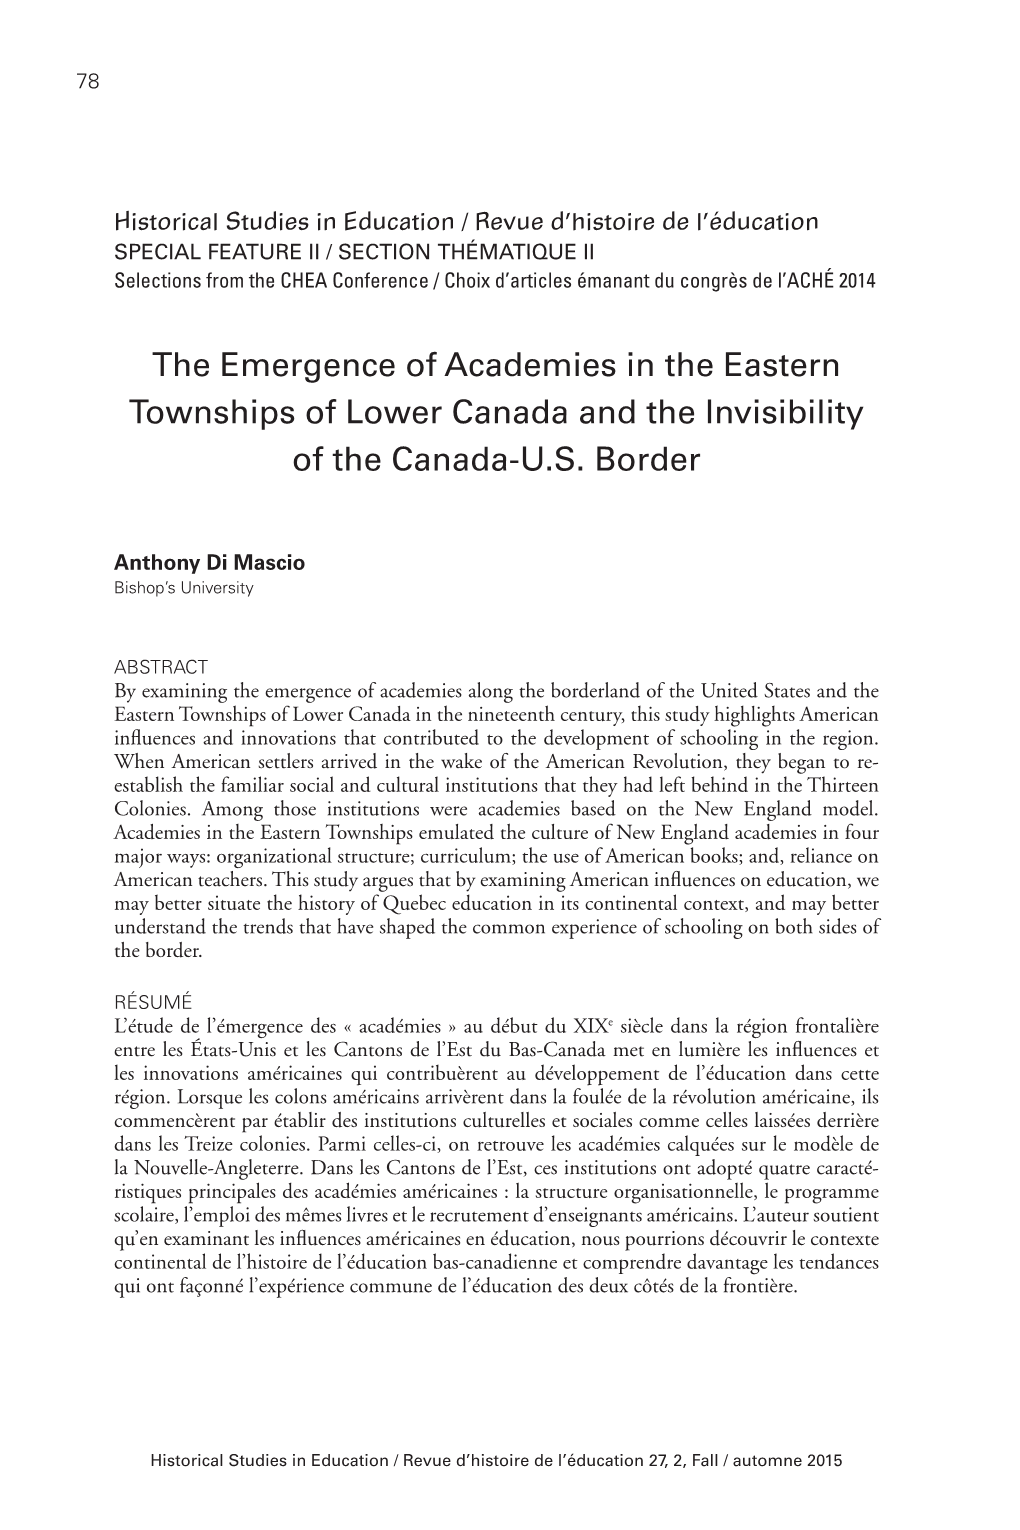 The Emergence of Academies in the Eastern Townships of Lower Canada and the Invisibility of the Canada-U.S